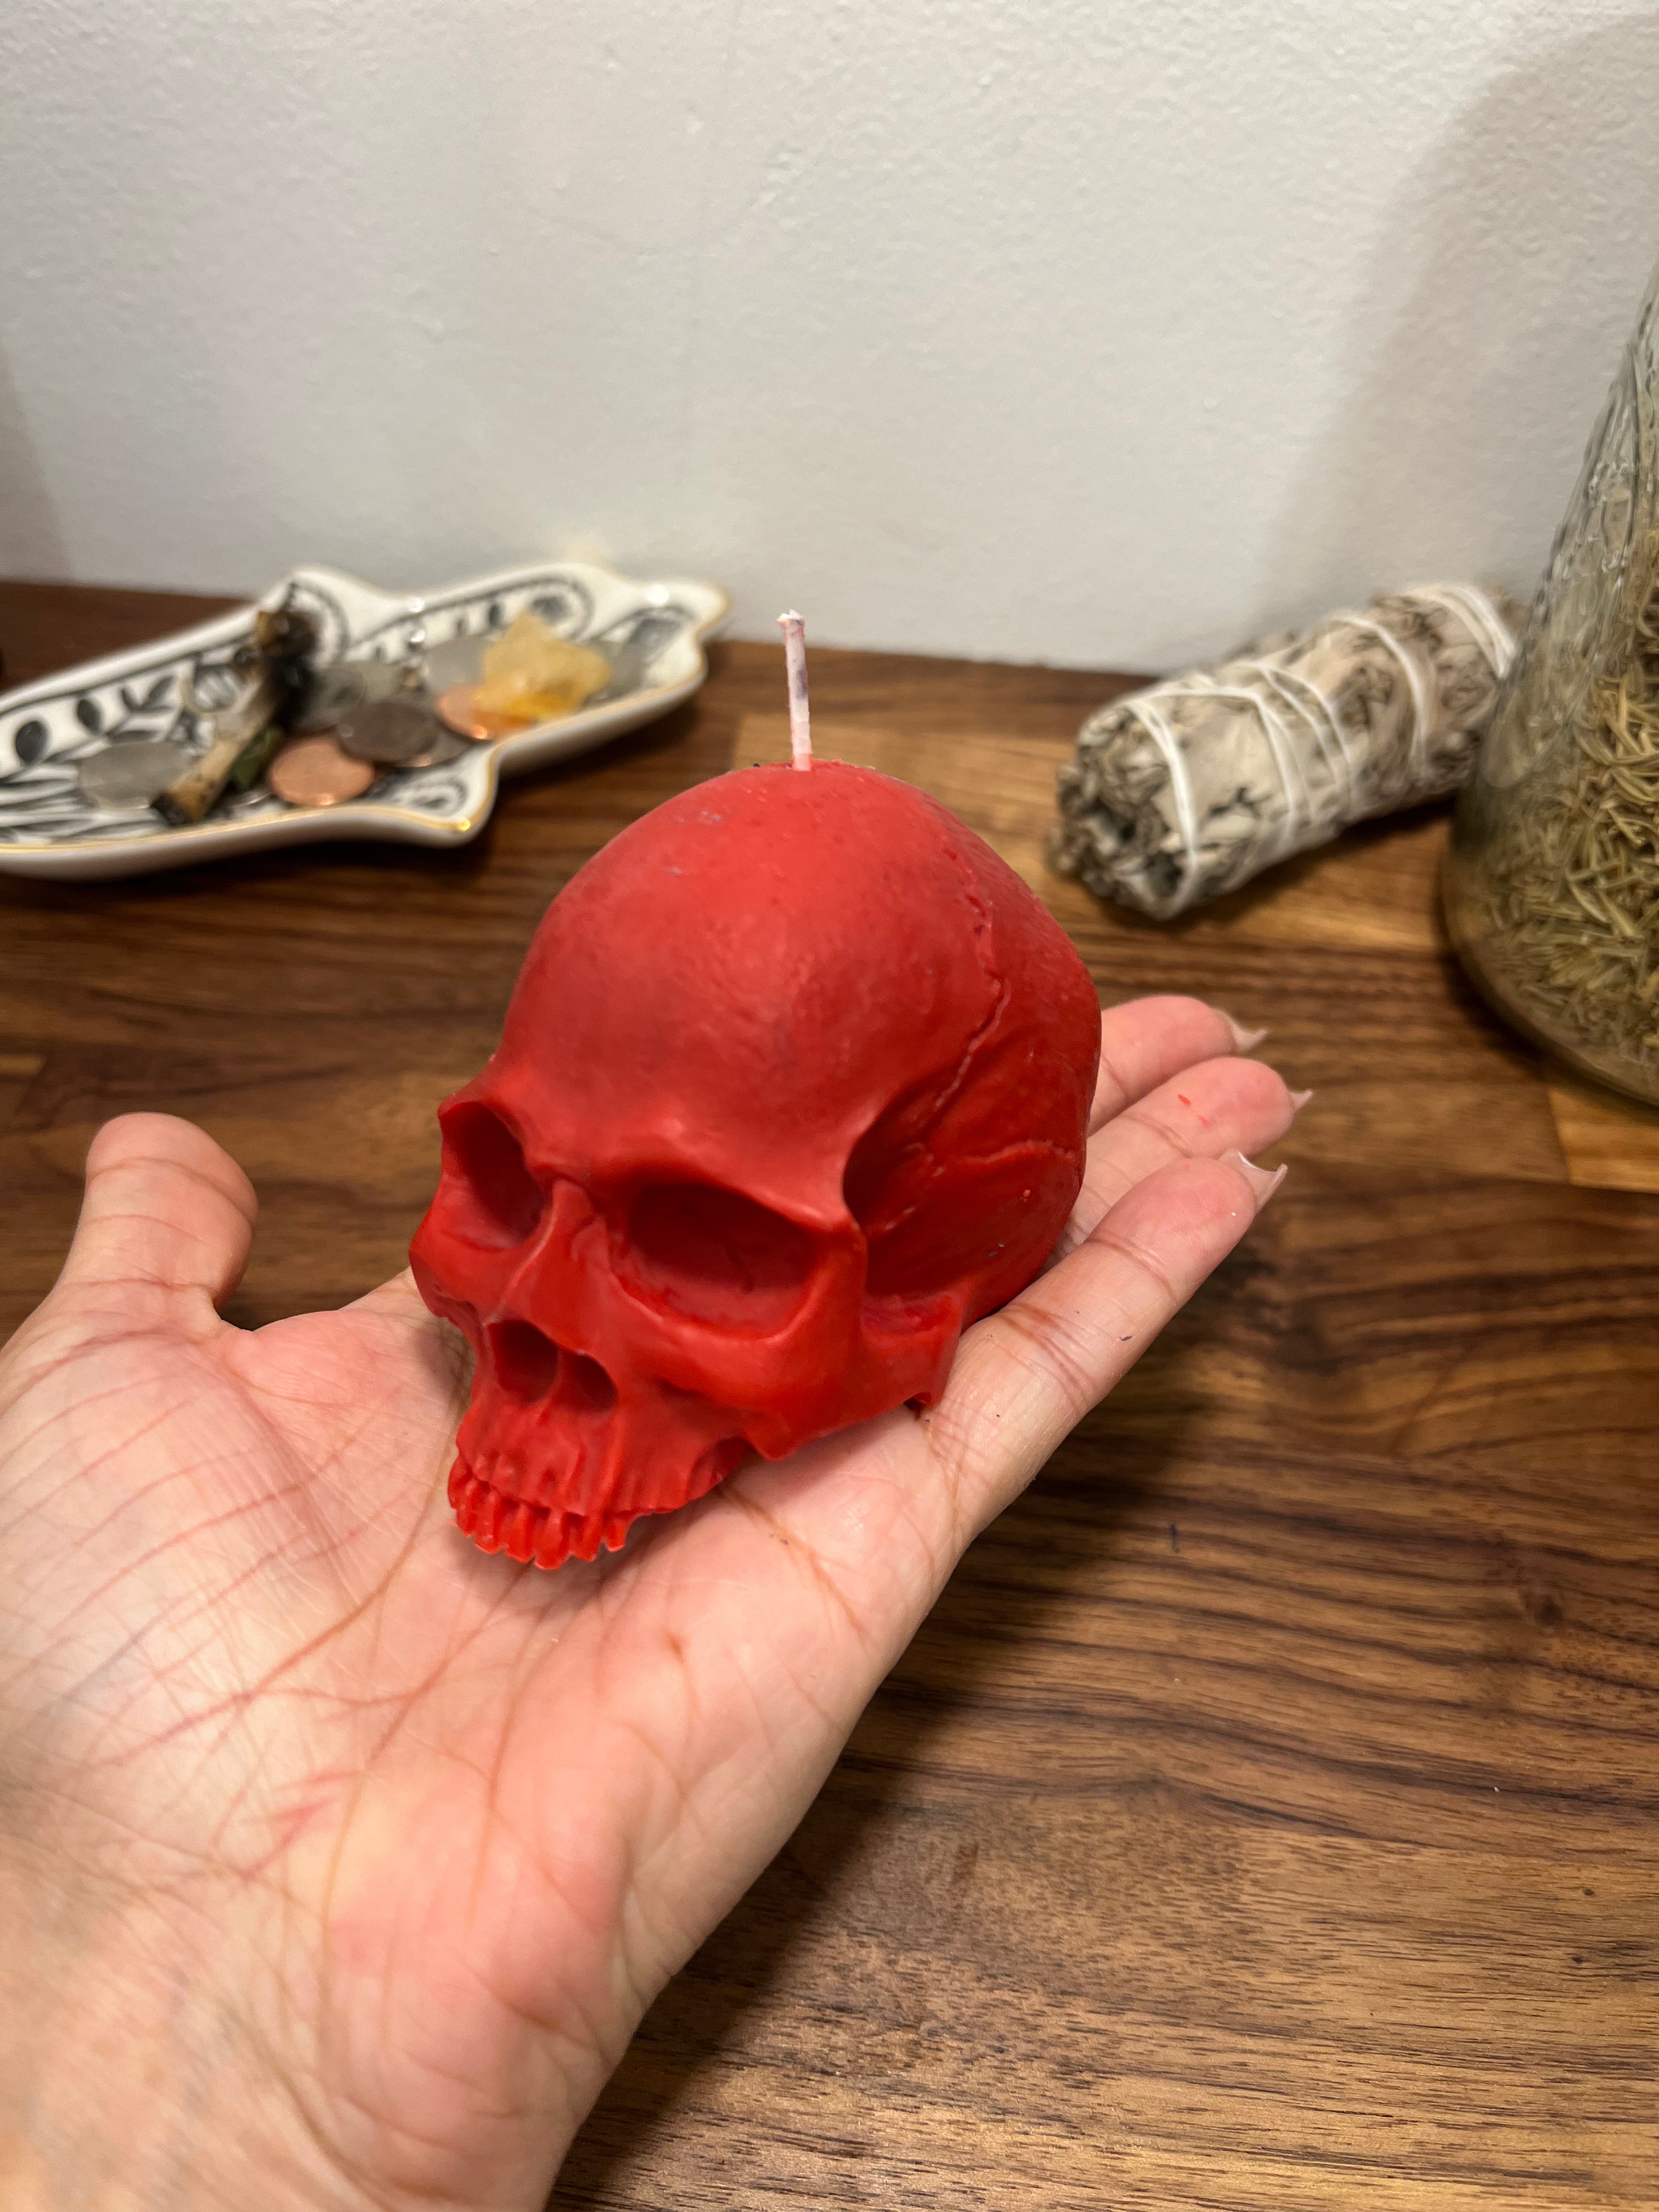 4 Skull Shaped Candles | Ritual Spell Candles